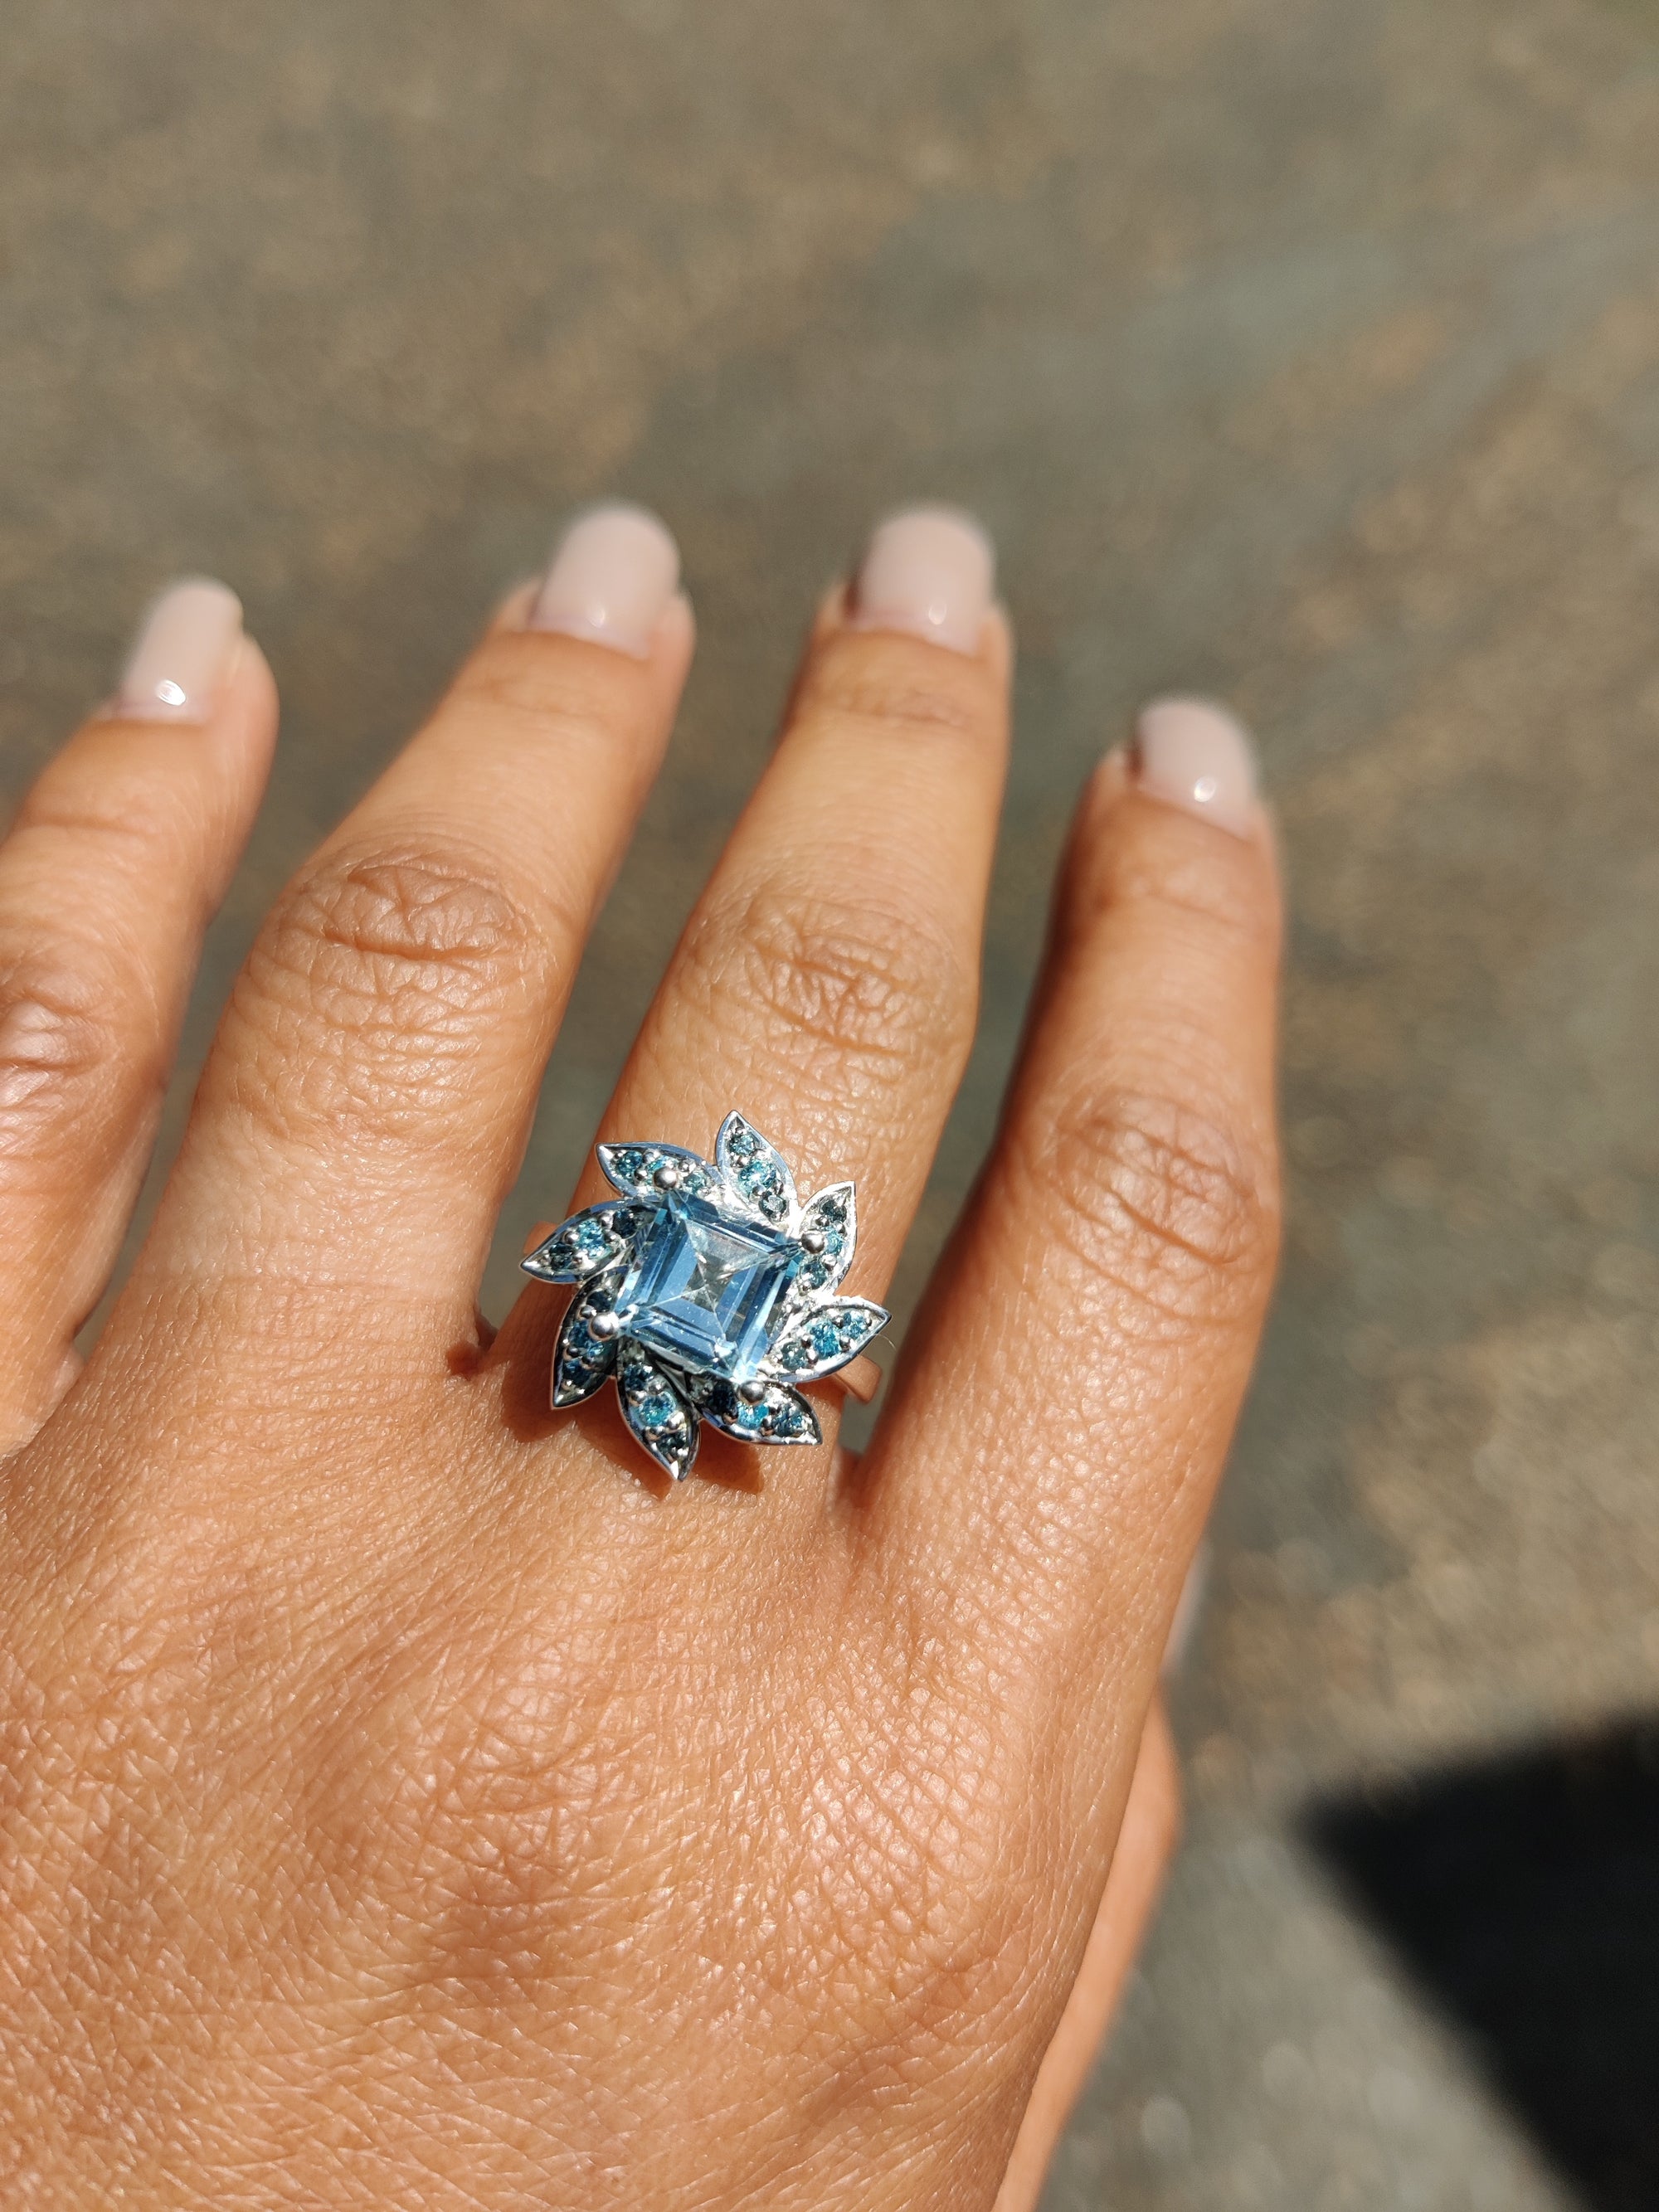 Floral Inspired Ring with Blue Stones-The Diamond Setter